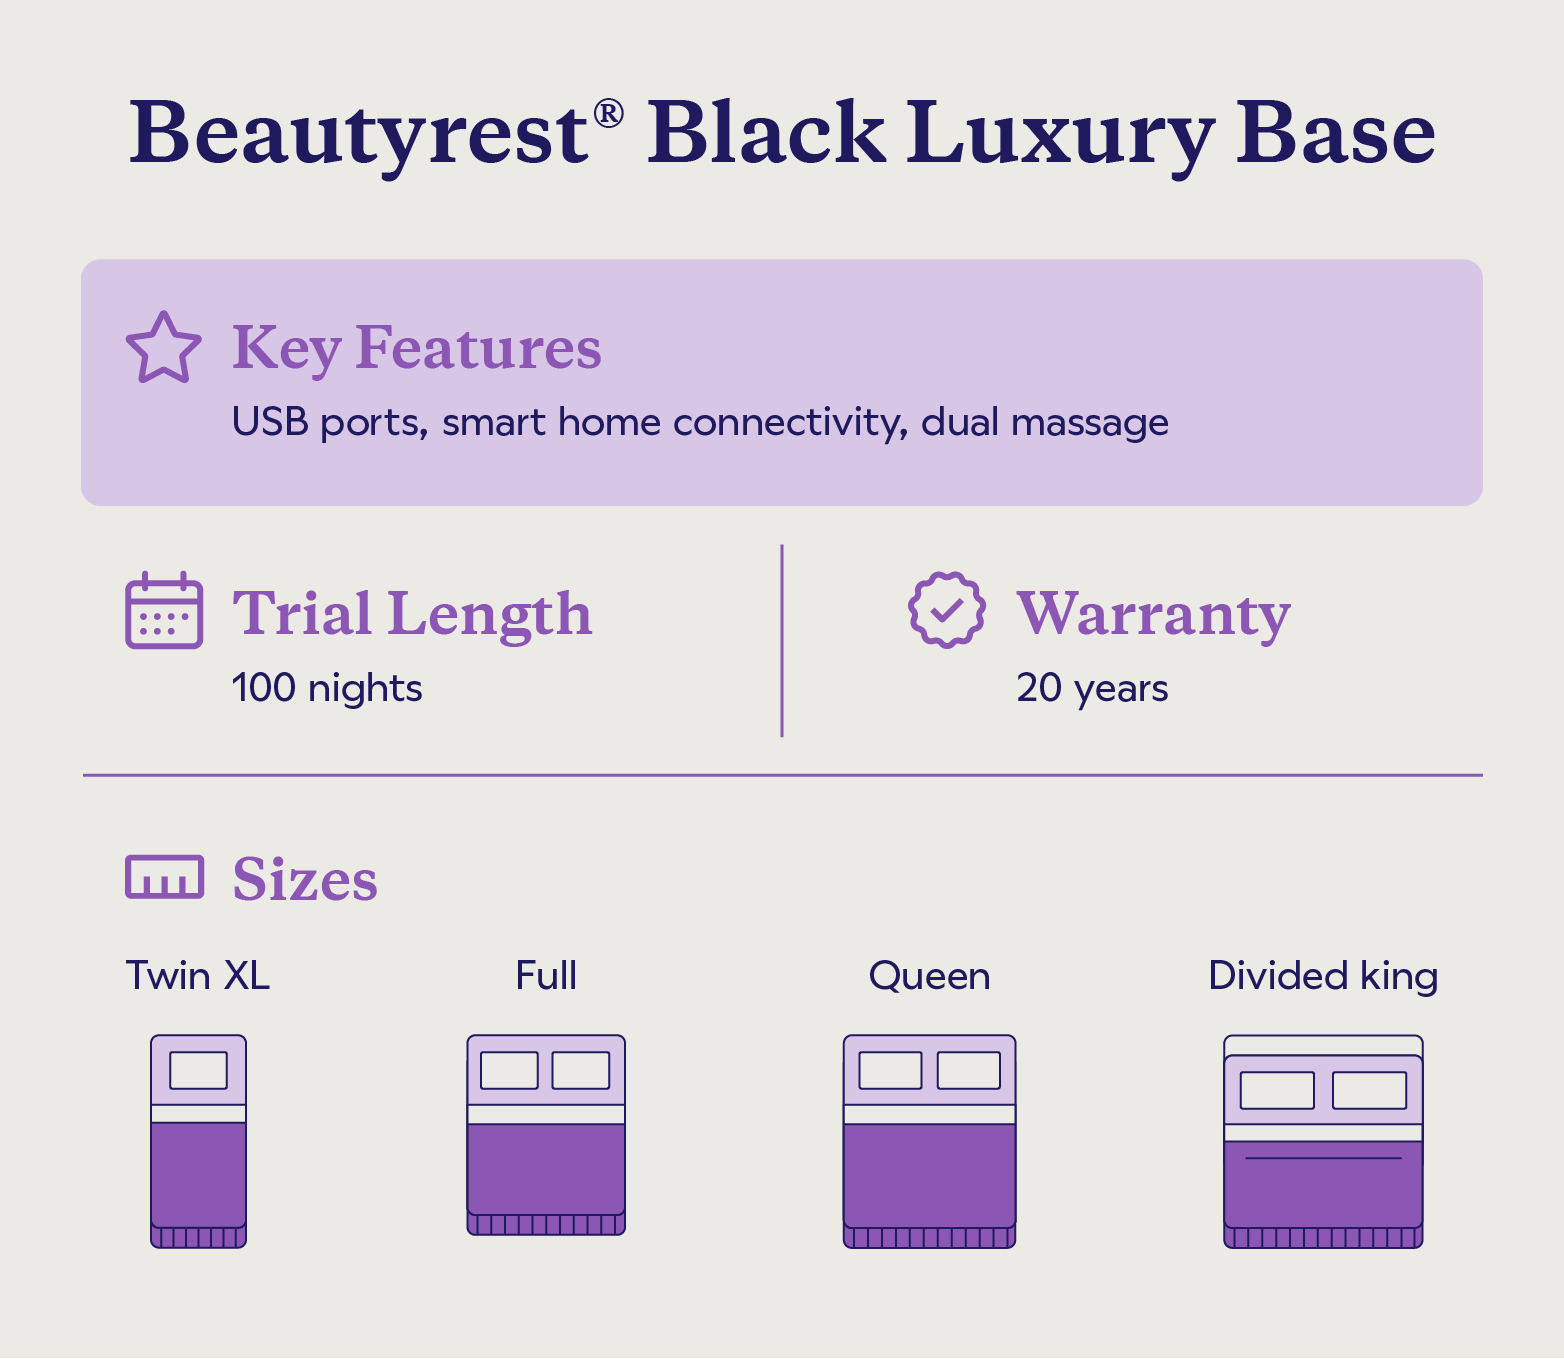 Key features and sizes of the Beautyrest Black Luxury Base.